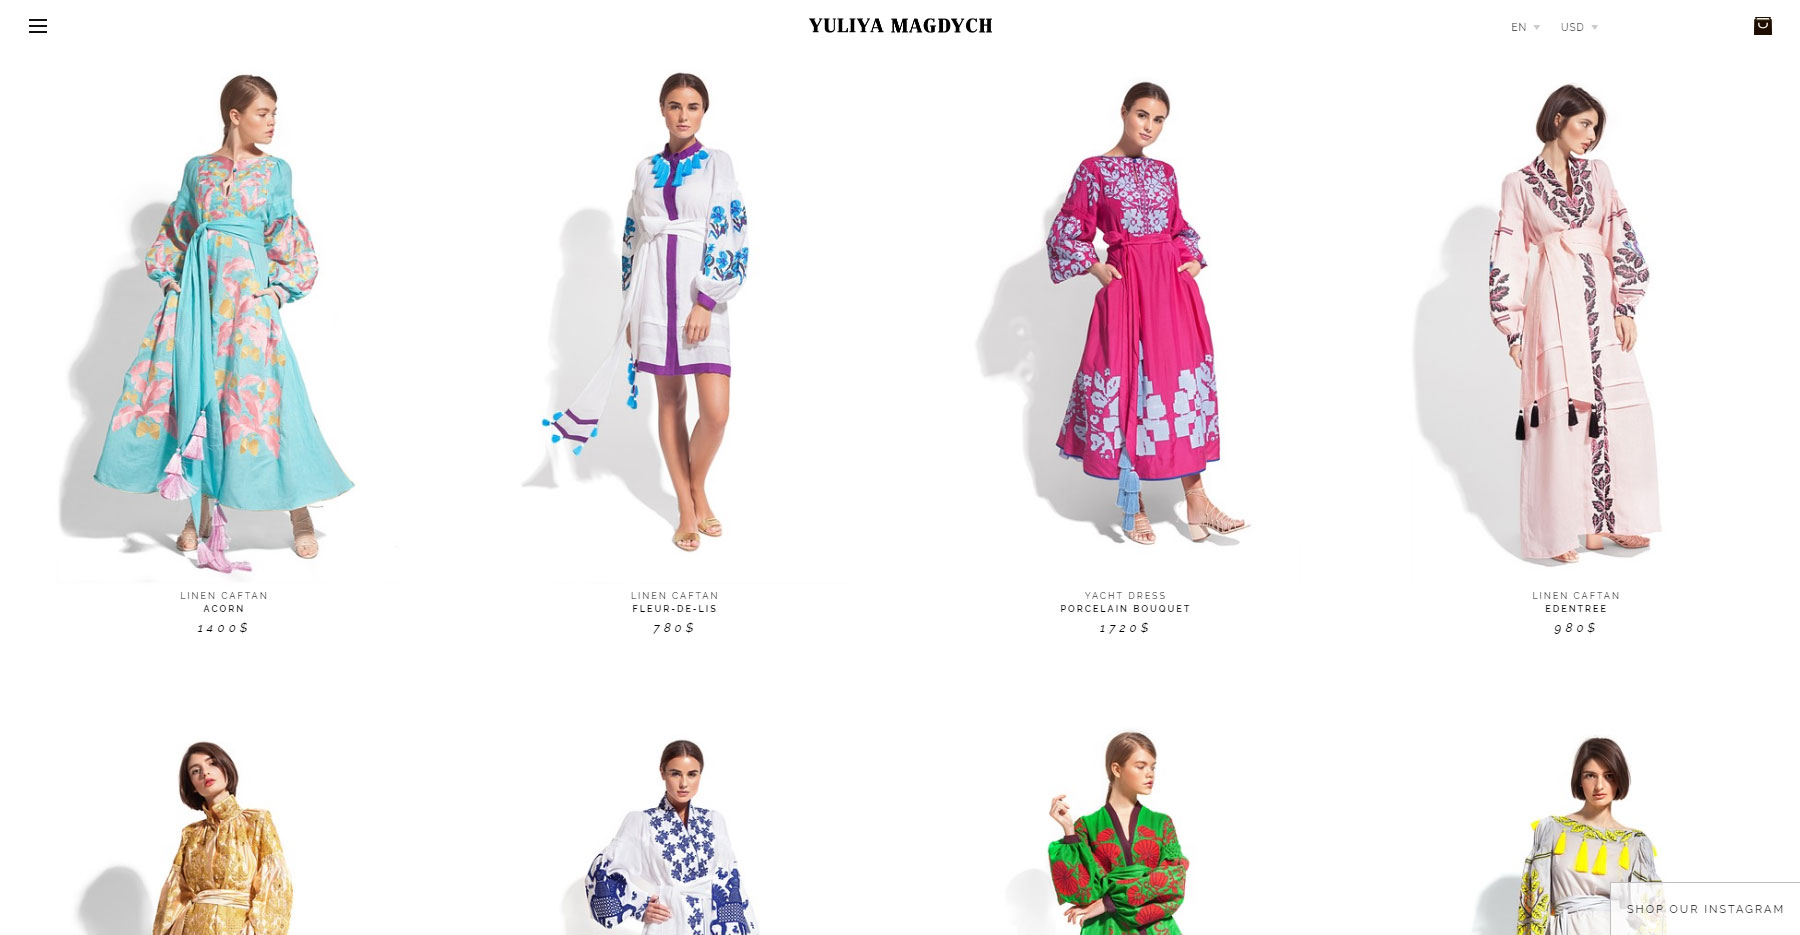 Yuliya Magdych Online Shop - Website of the Day